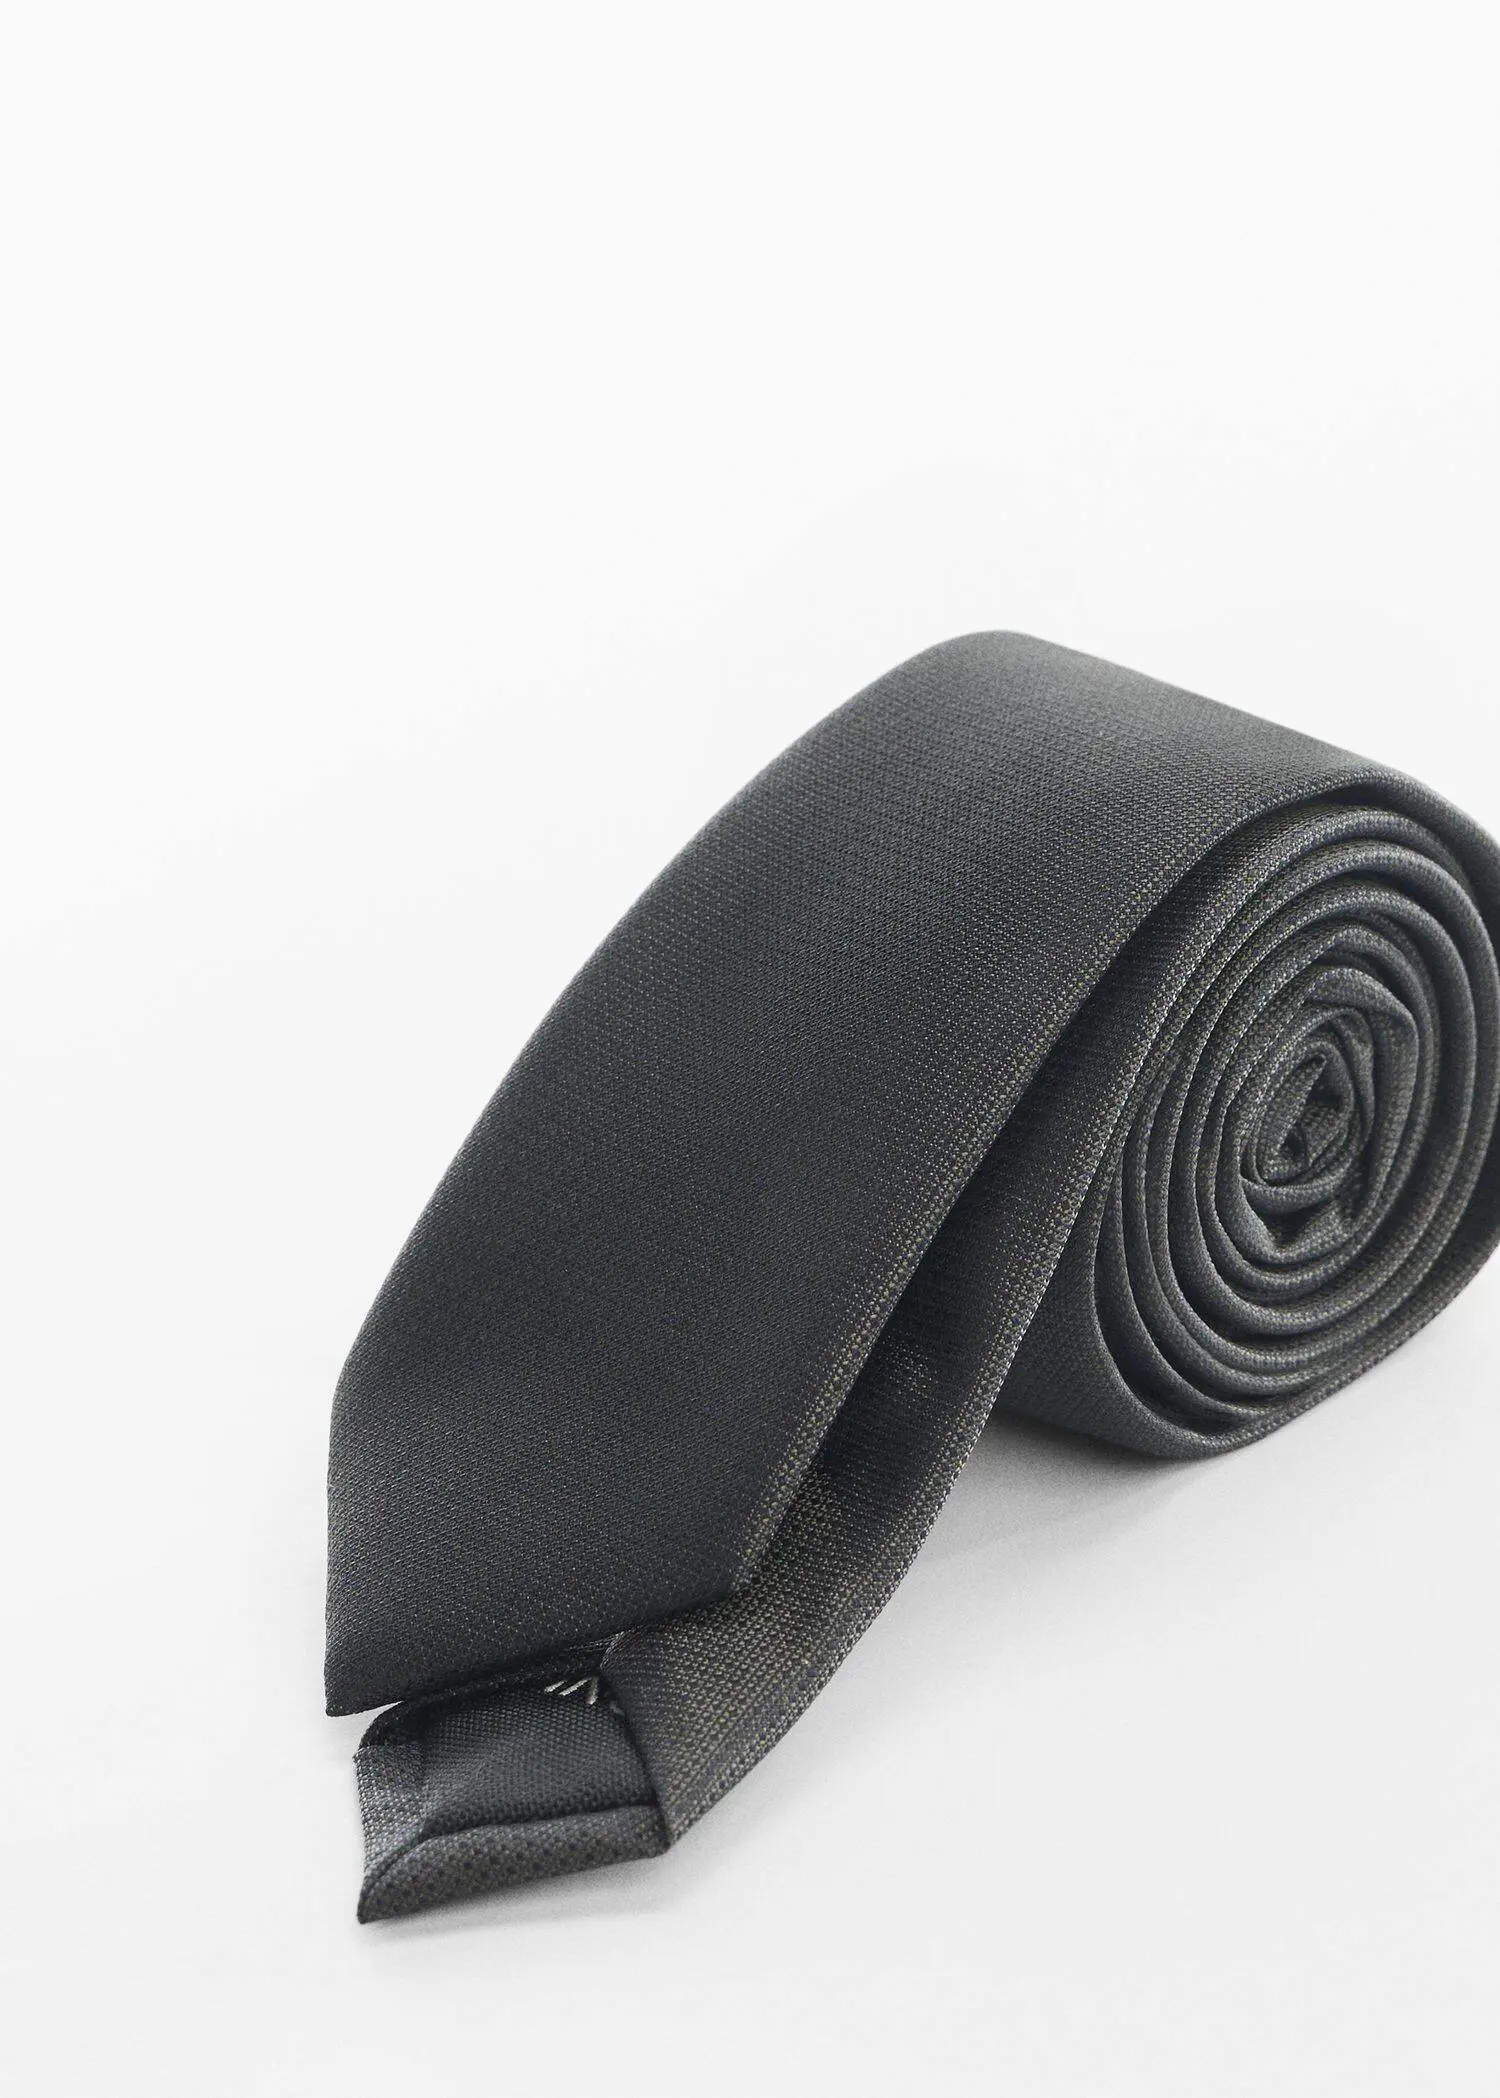 Mango Narrow structured tie. a close up of a tie on a white background 